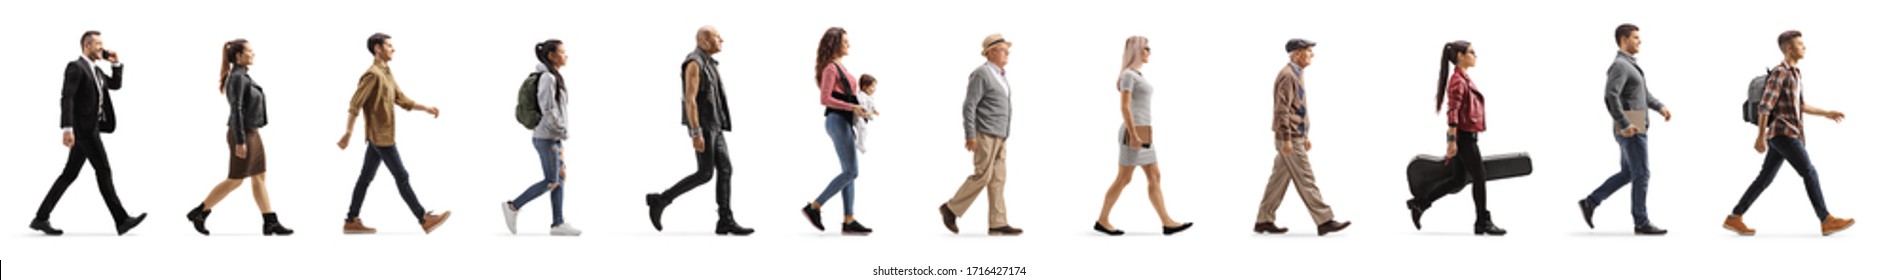 Long line of different profile people walking isolated on white background